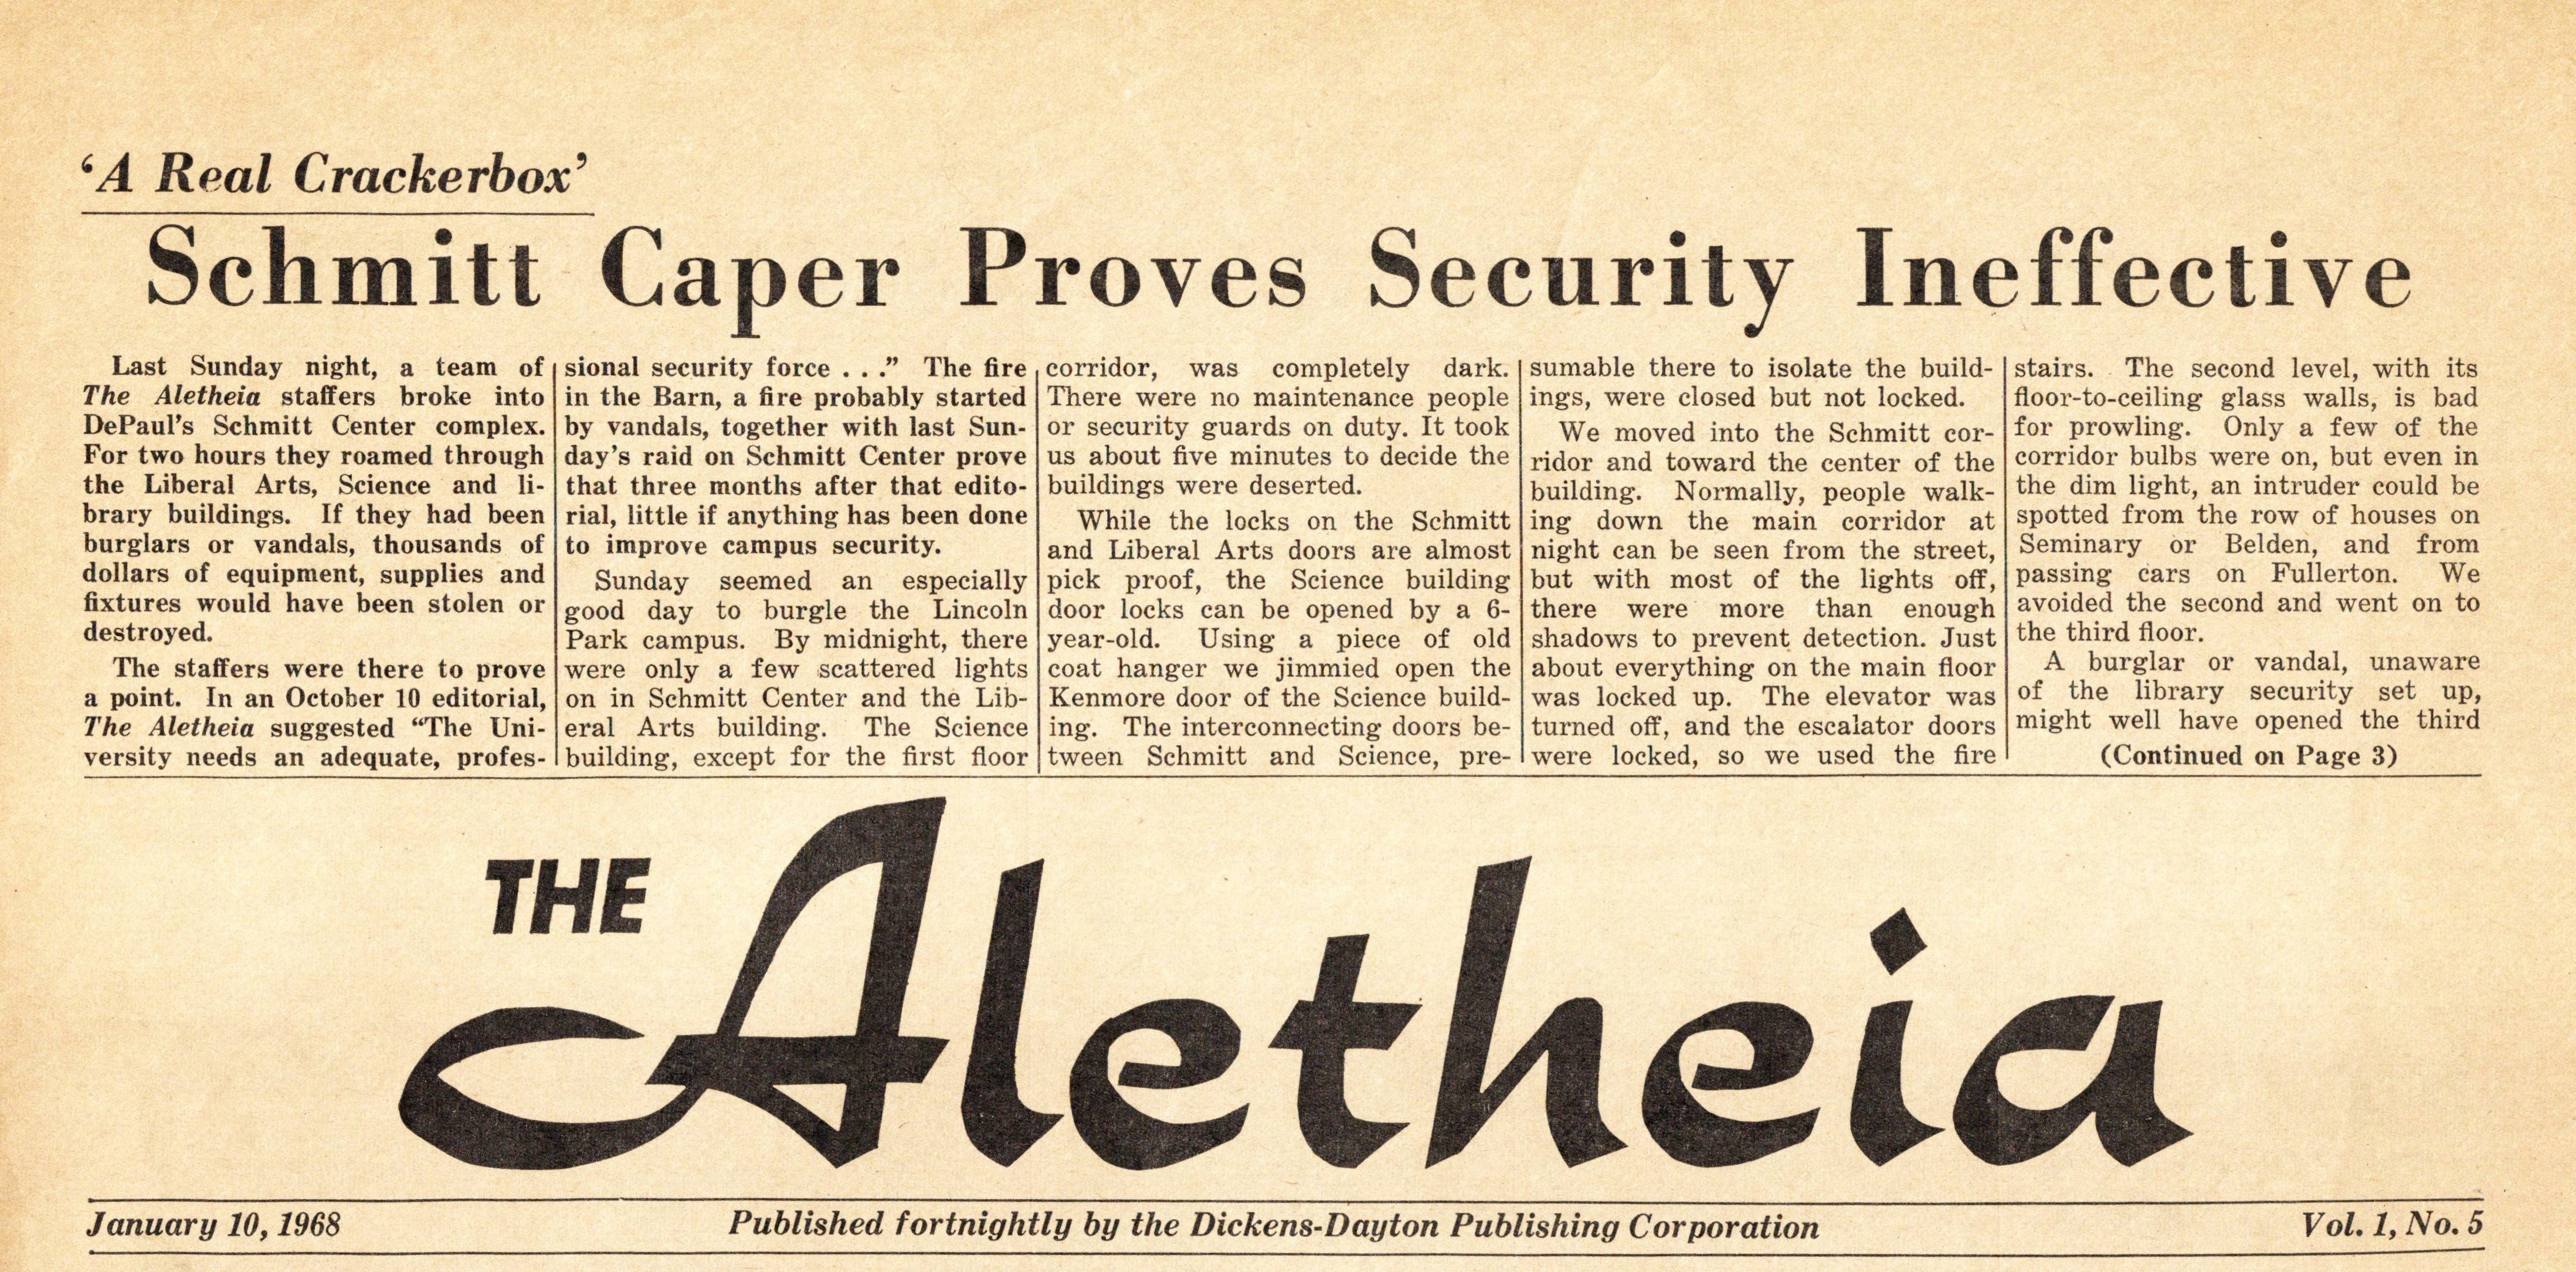 The Aletheia's coverage of their own break-in circa 1968 (courtesy of the DePaul Richardson Library Digital Collections)